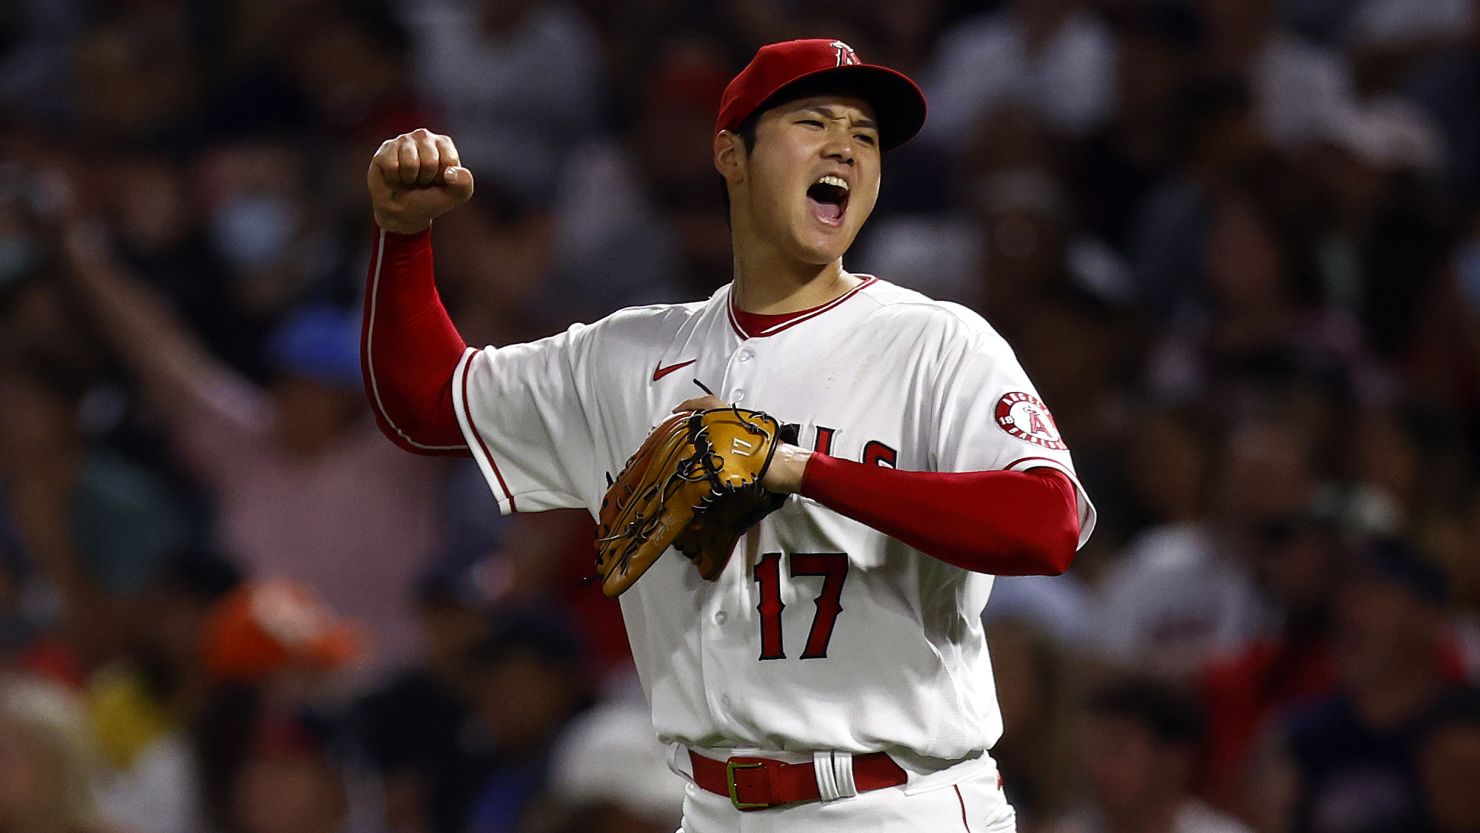 Ohtani celebrates against the Boston Red Sox in what would be the Angels' first win since May 24.